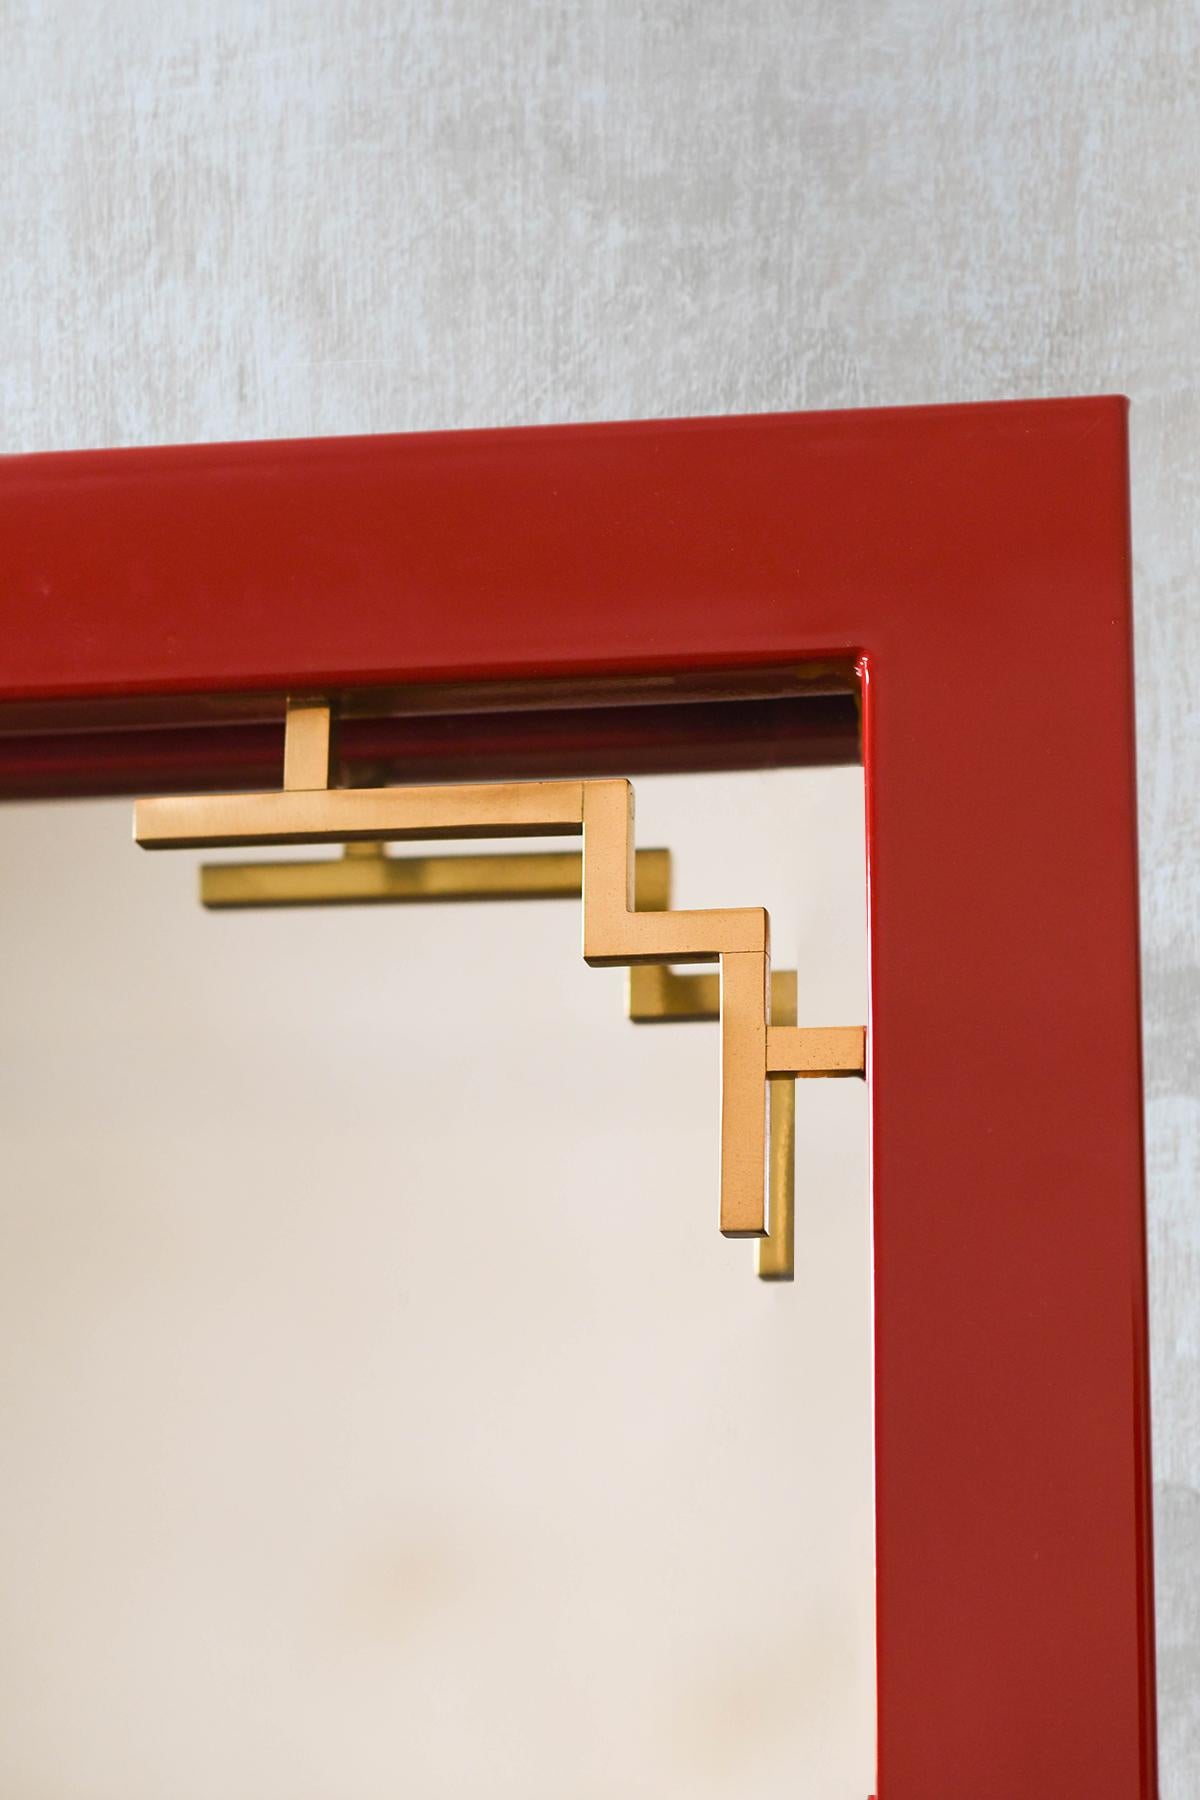 China Red Mirror With Brass Details From The 1970s – Lacquered Series In Good Condition For Sale In Roma, RM